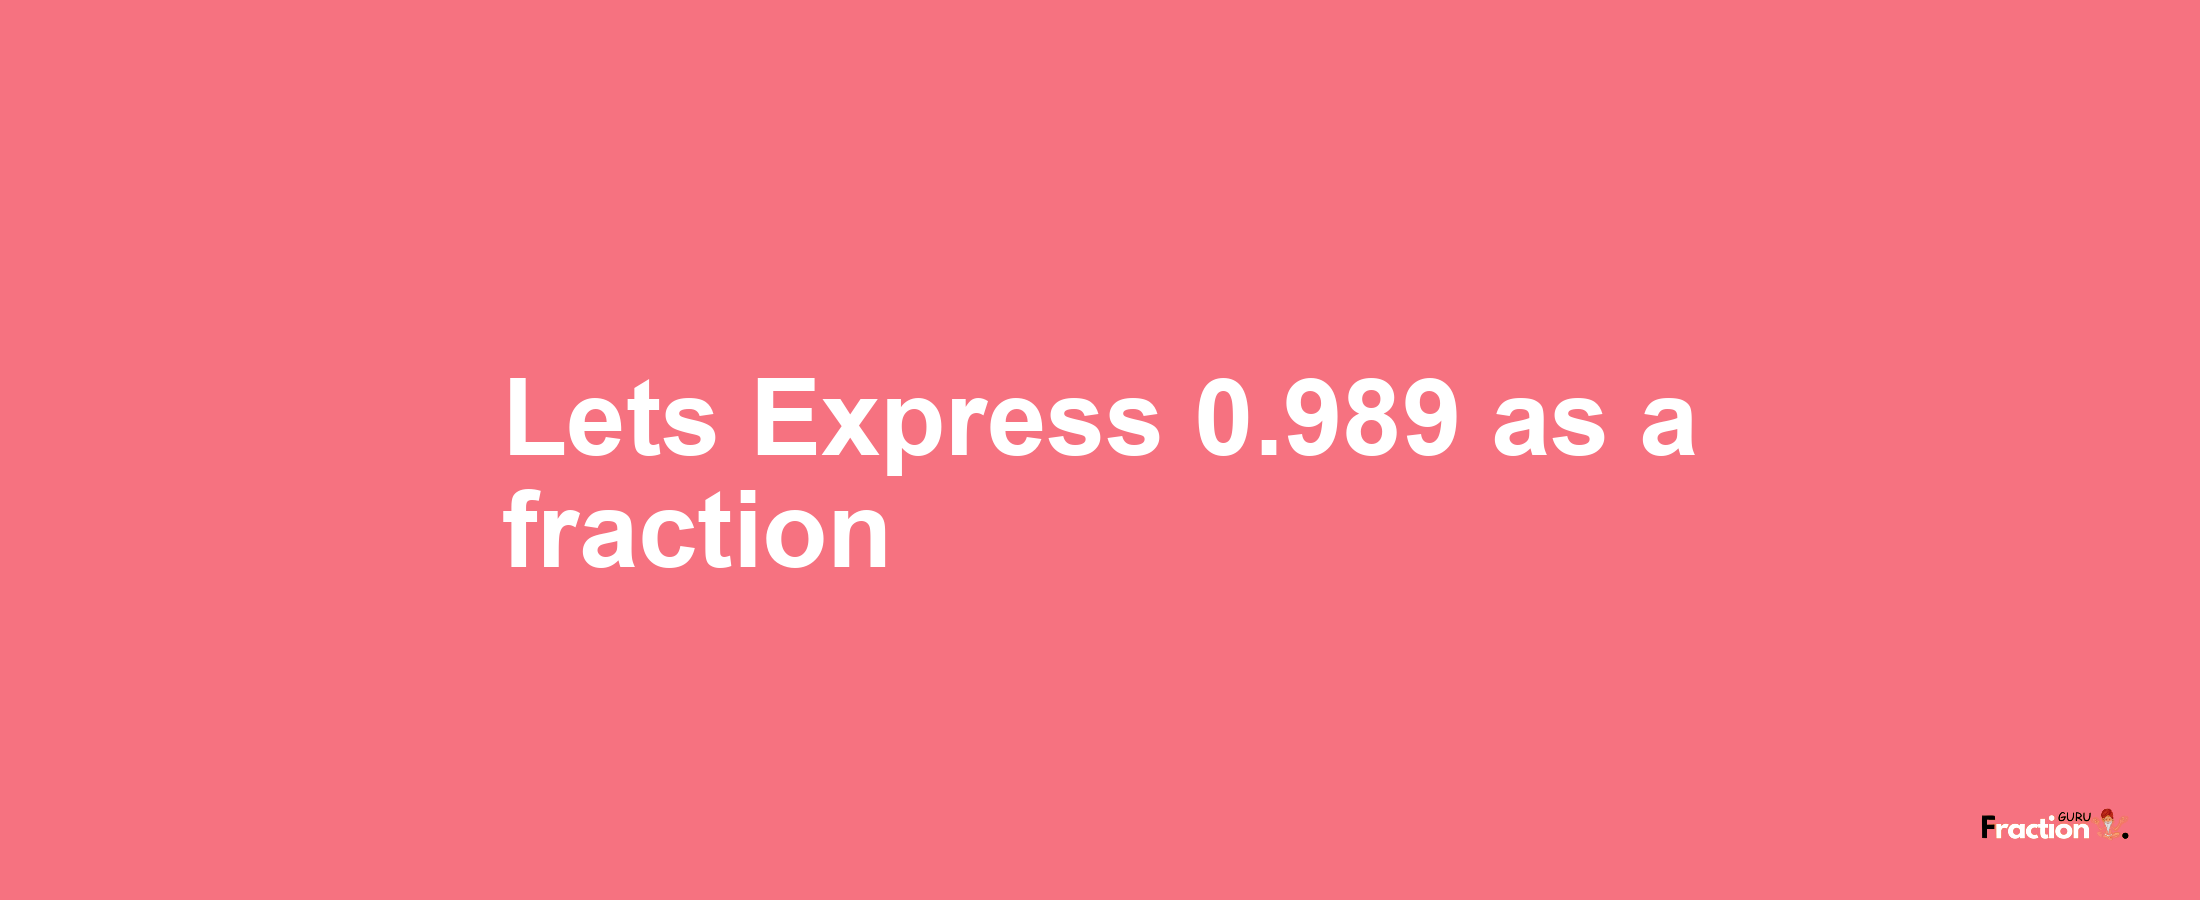 Lets Express 0.989 as afraction